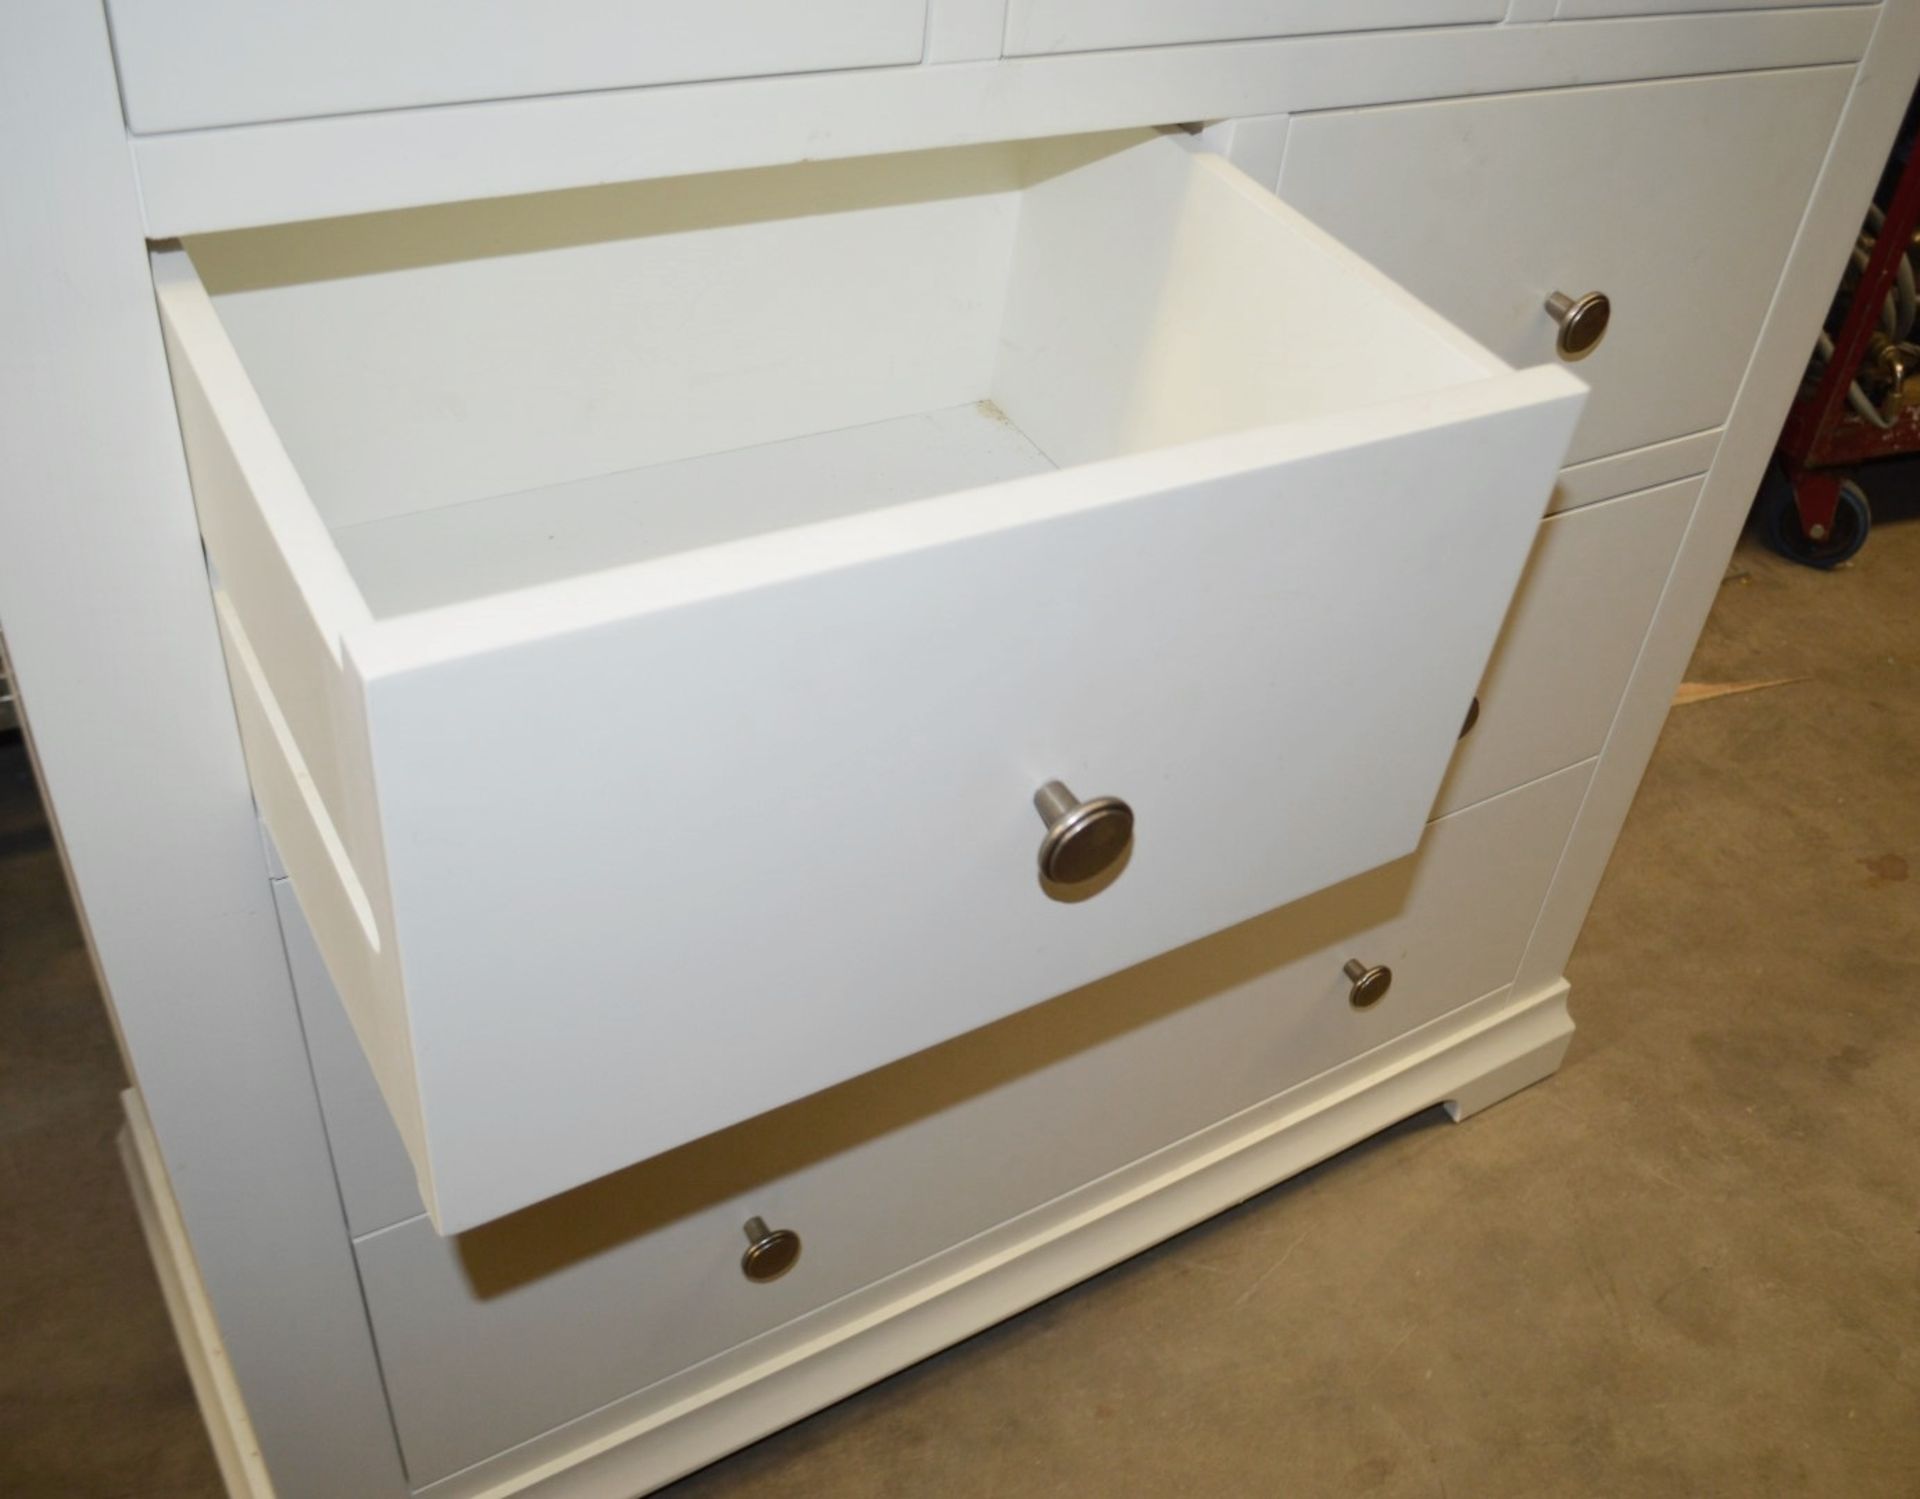 1 x Tall Drawer Unit In Cream - From An Exclusive Property In Hale Barns - Dimensions: 105 x 42 x - Image 3 of 6